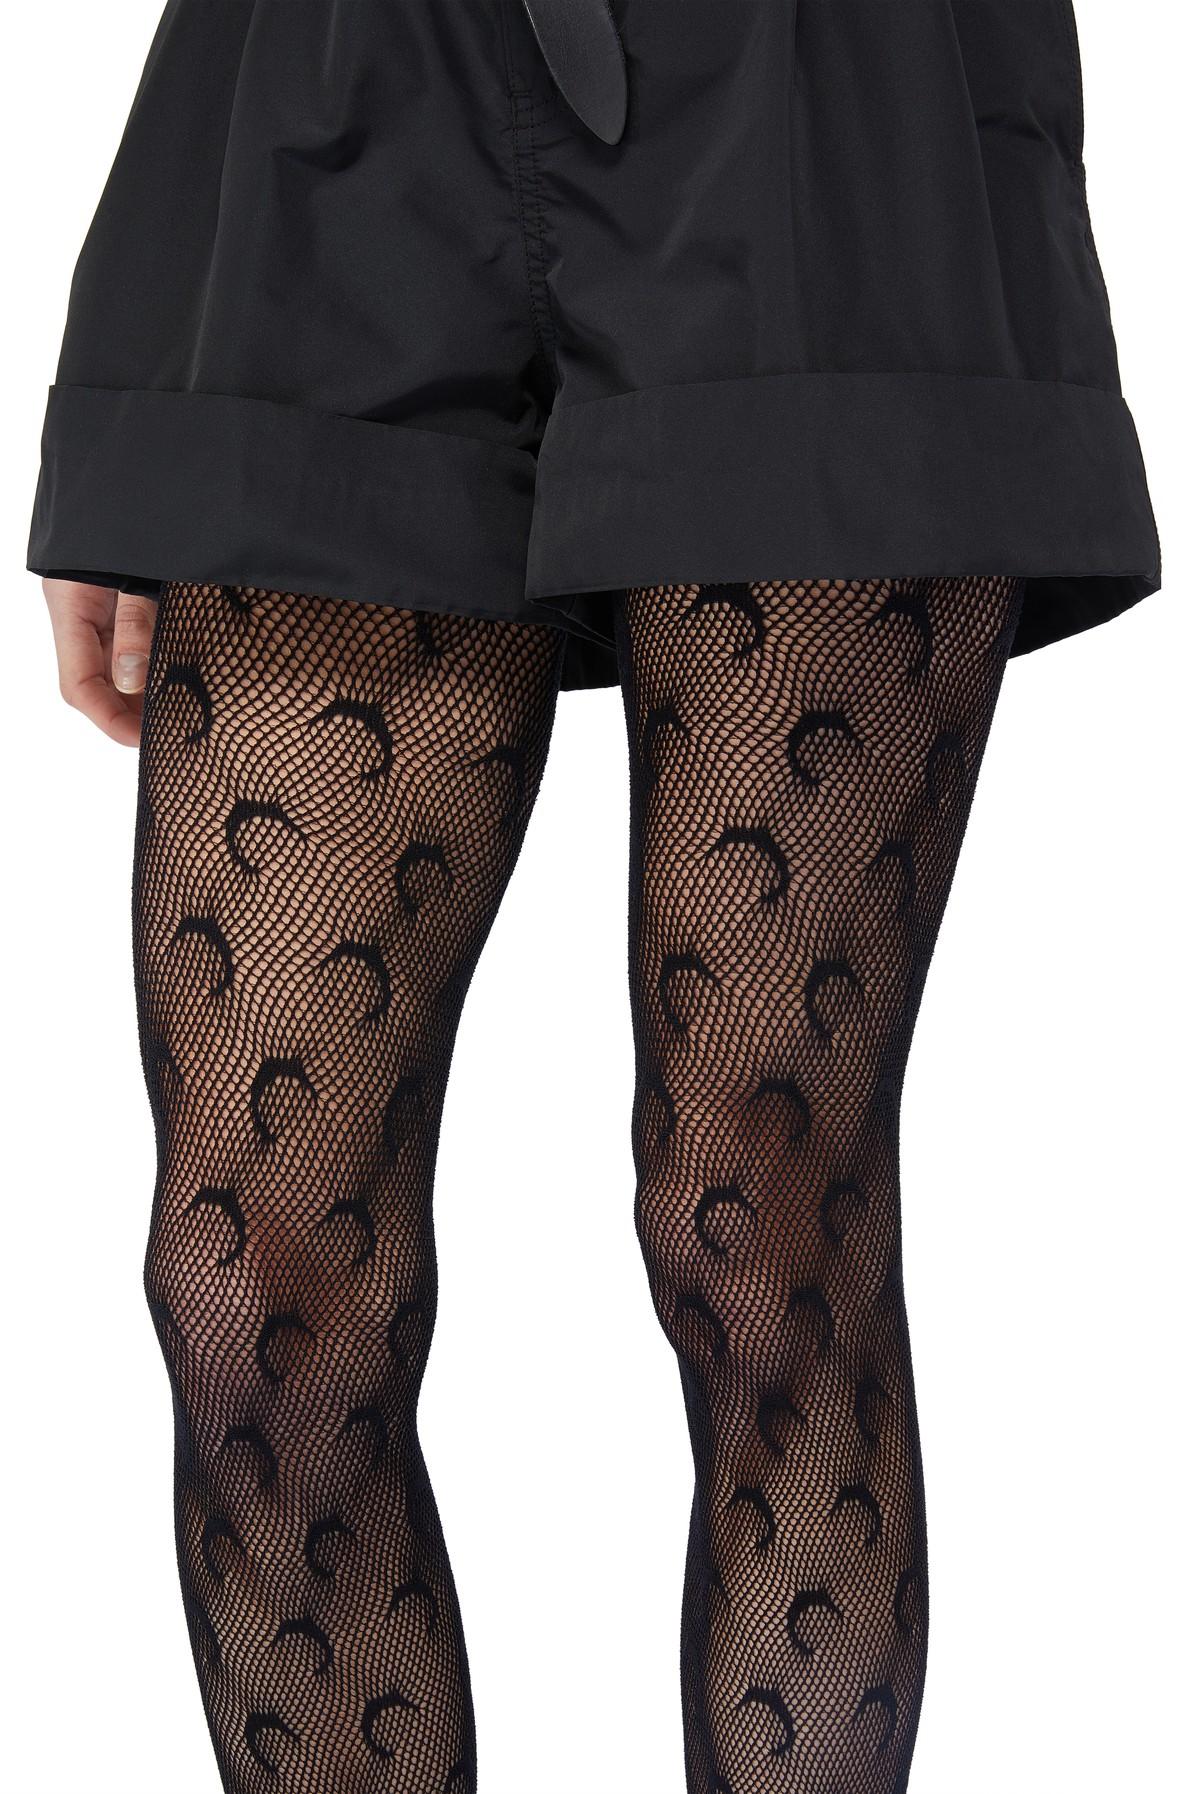 Marine Serre Recycled Moon Fishnet Tights in Black | Lyst Canada